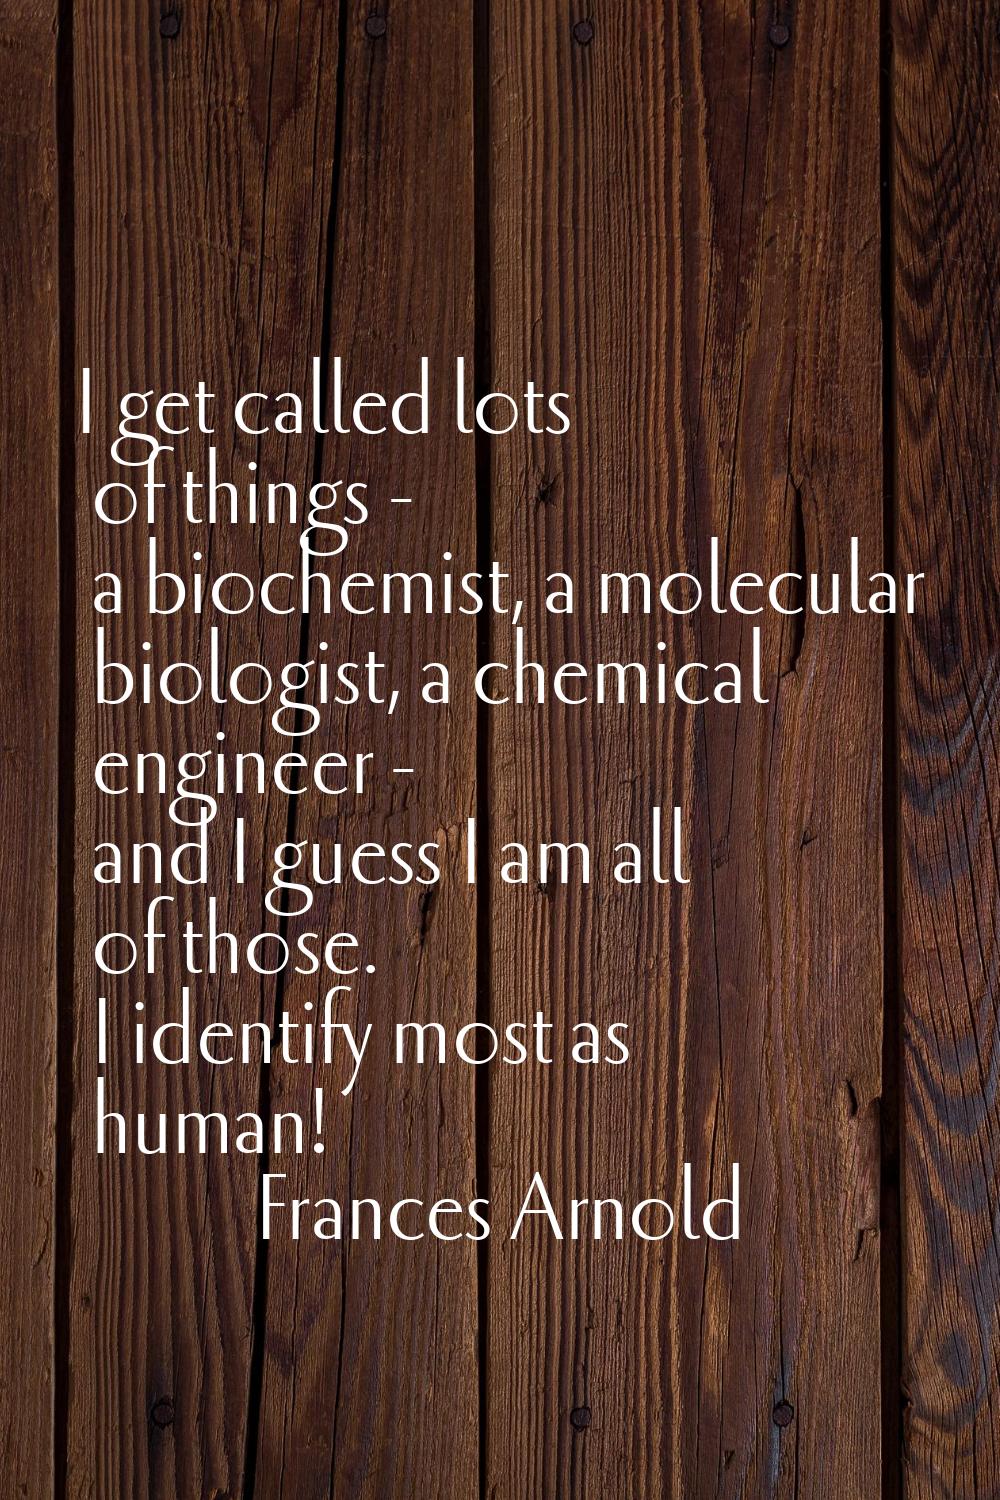 I get called lots of things - a biochemist, a molecular biologist, a chemical engineer - and I gues